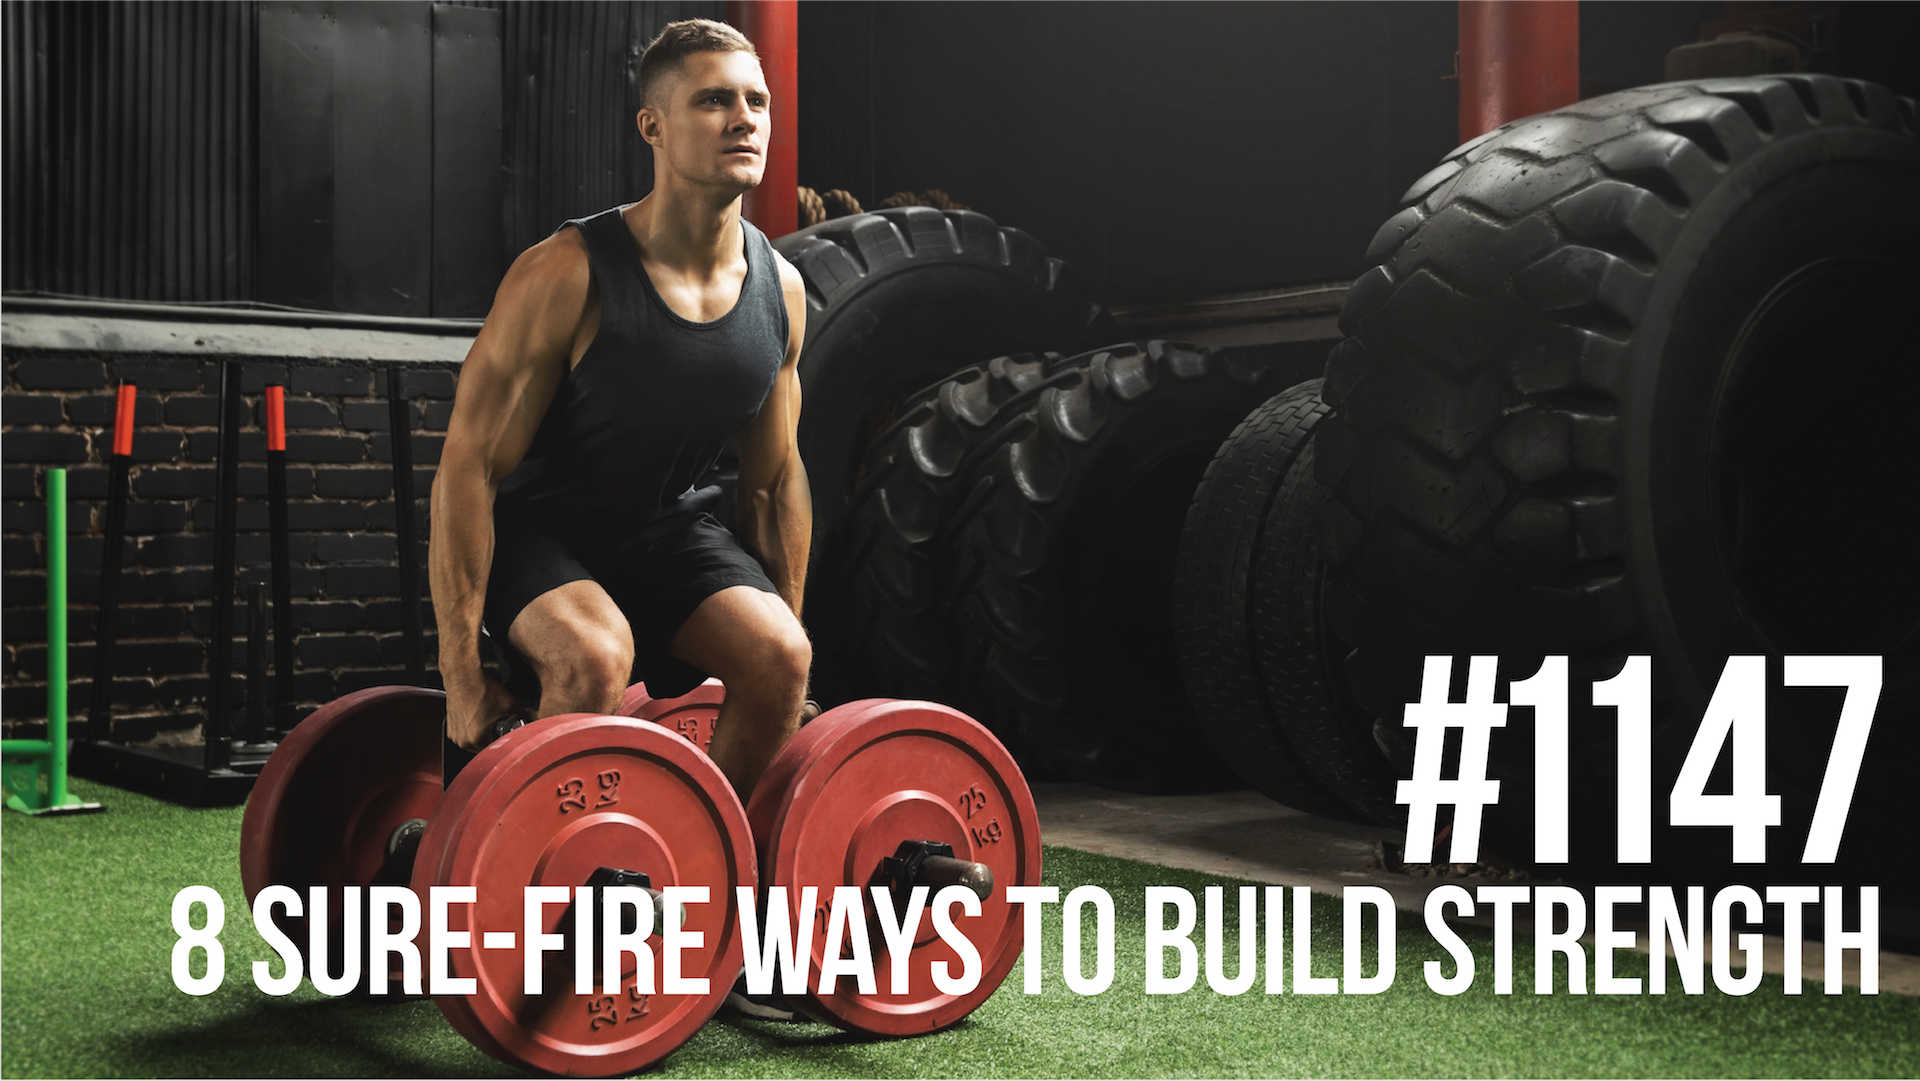 1147: Eight Sure-Fire Ways to Build Strength